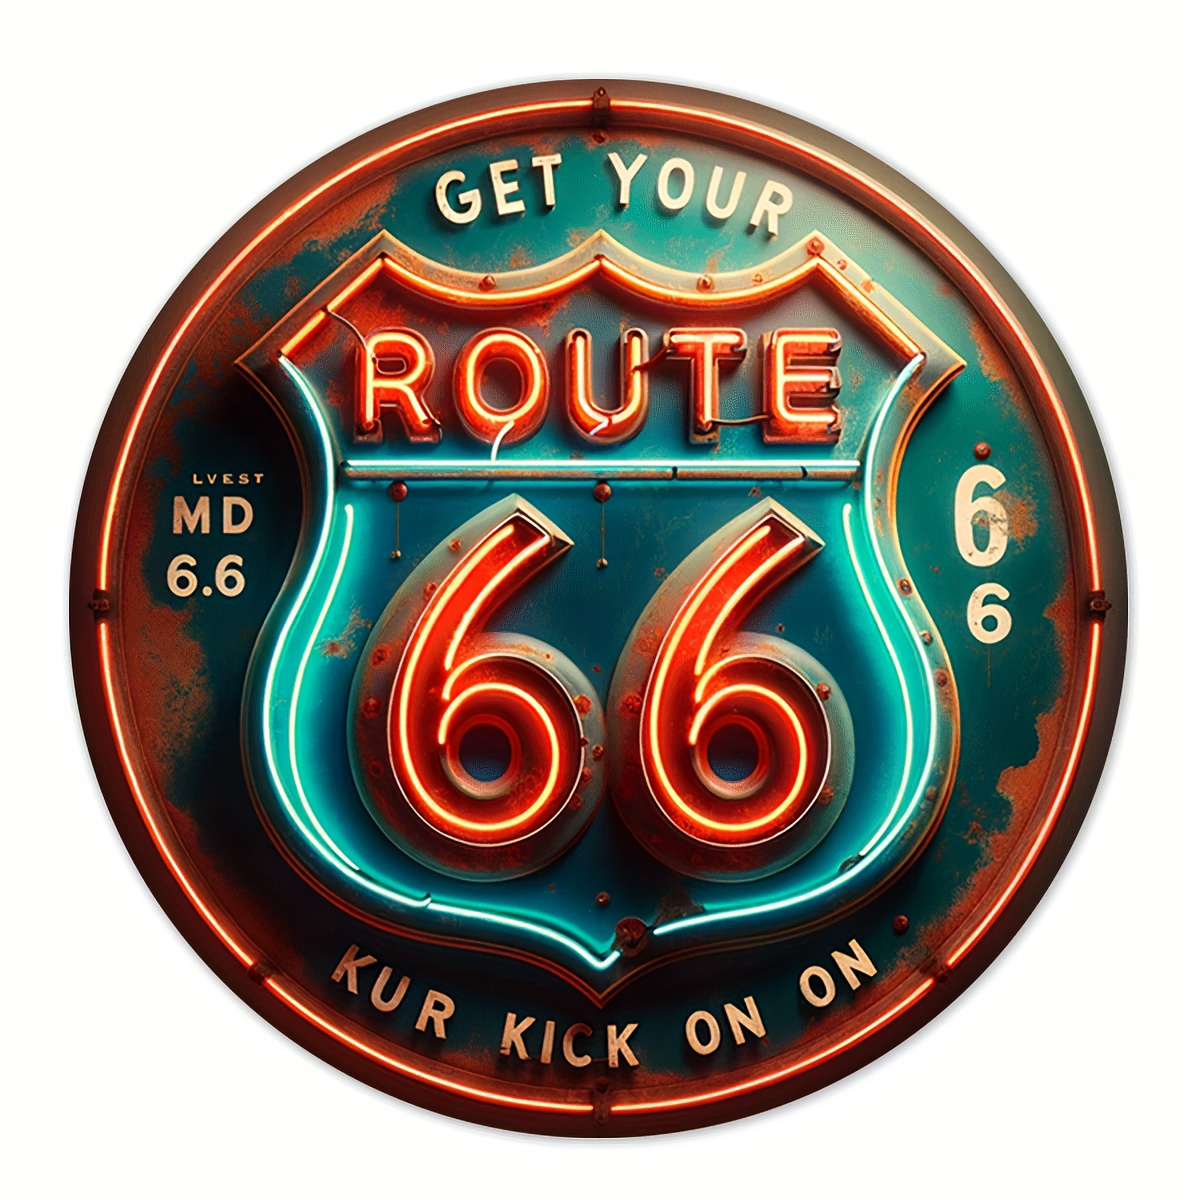 

retro Chic" Vintage Route 66 Metal Sign (8x8 Inches) - Aluminum Wall Art For Home, Bar, Cafe, Man Cave & Garage Decor